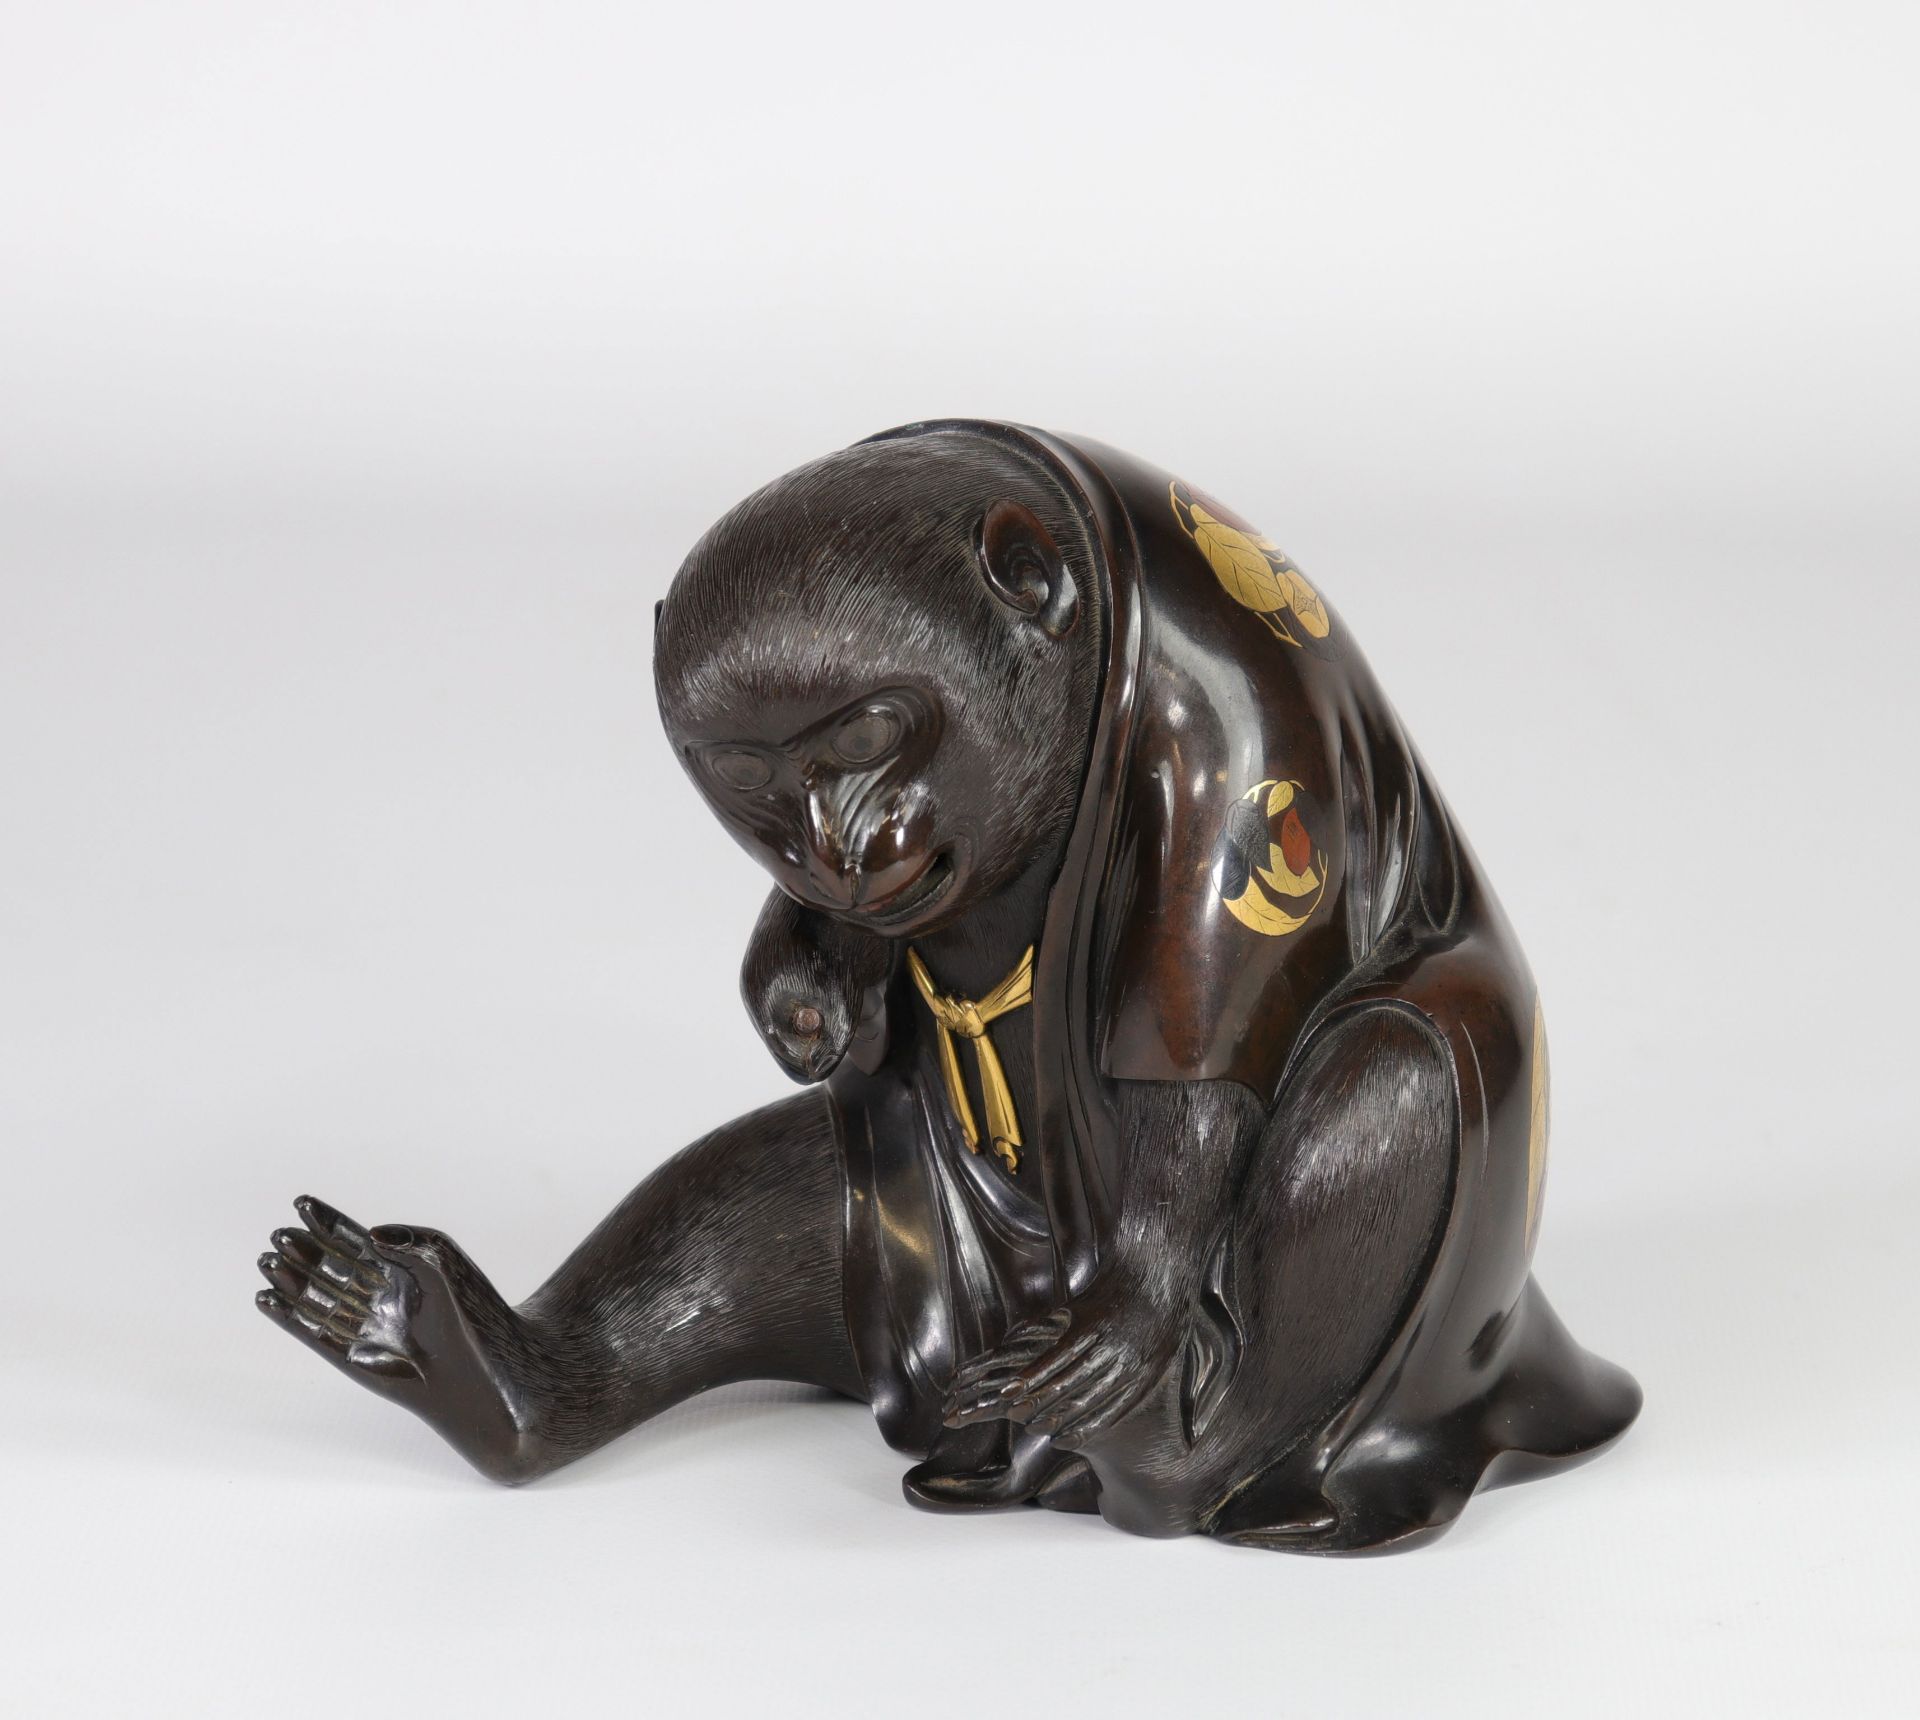 Japan Bronze with copper inlays "the monkey" 19th